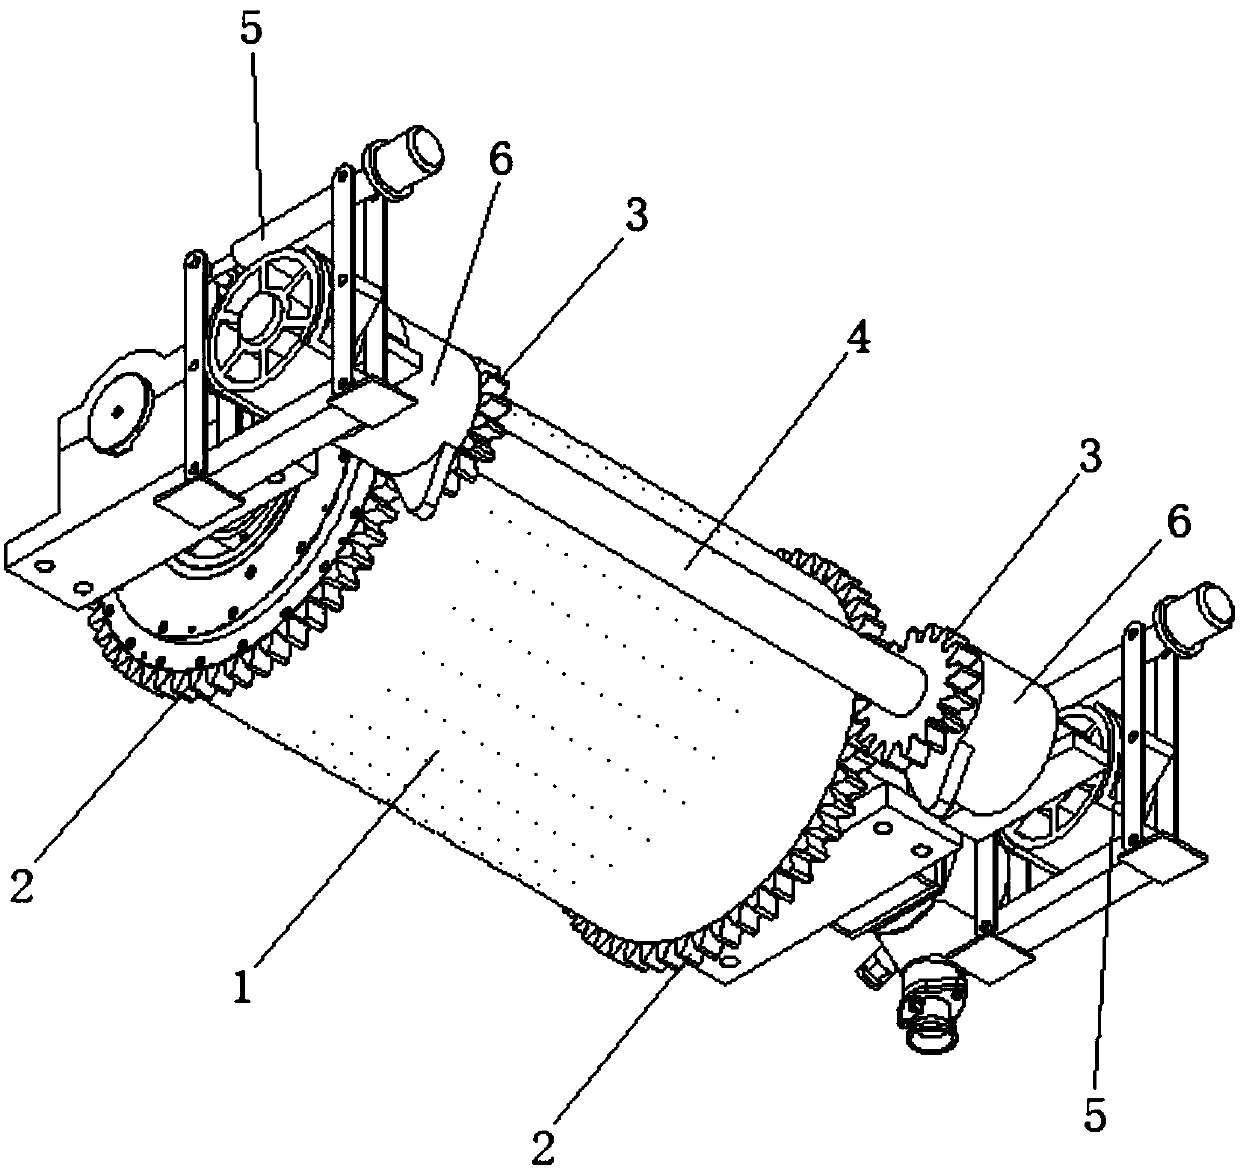 Braking device for permanent-magnet direct-driving roller